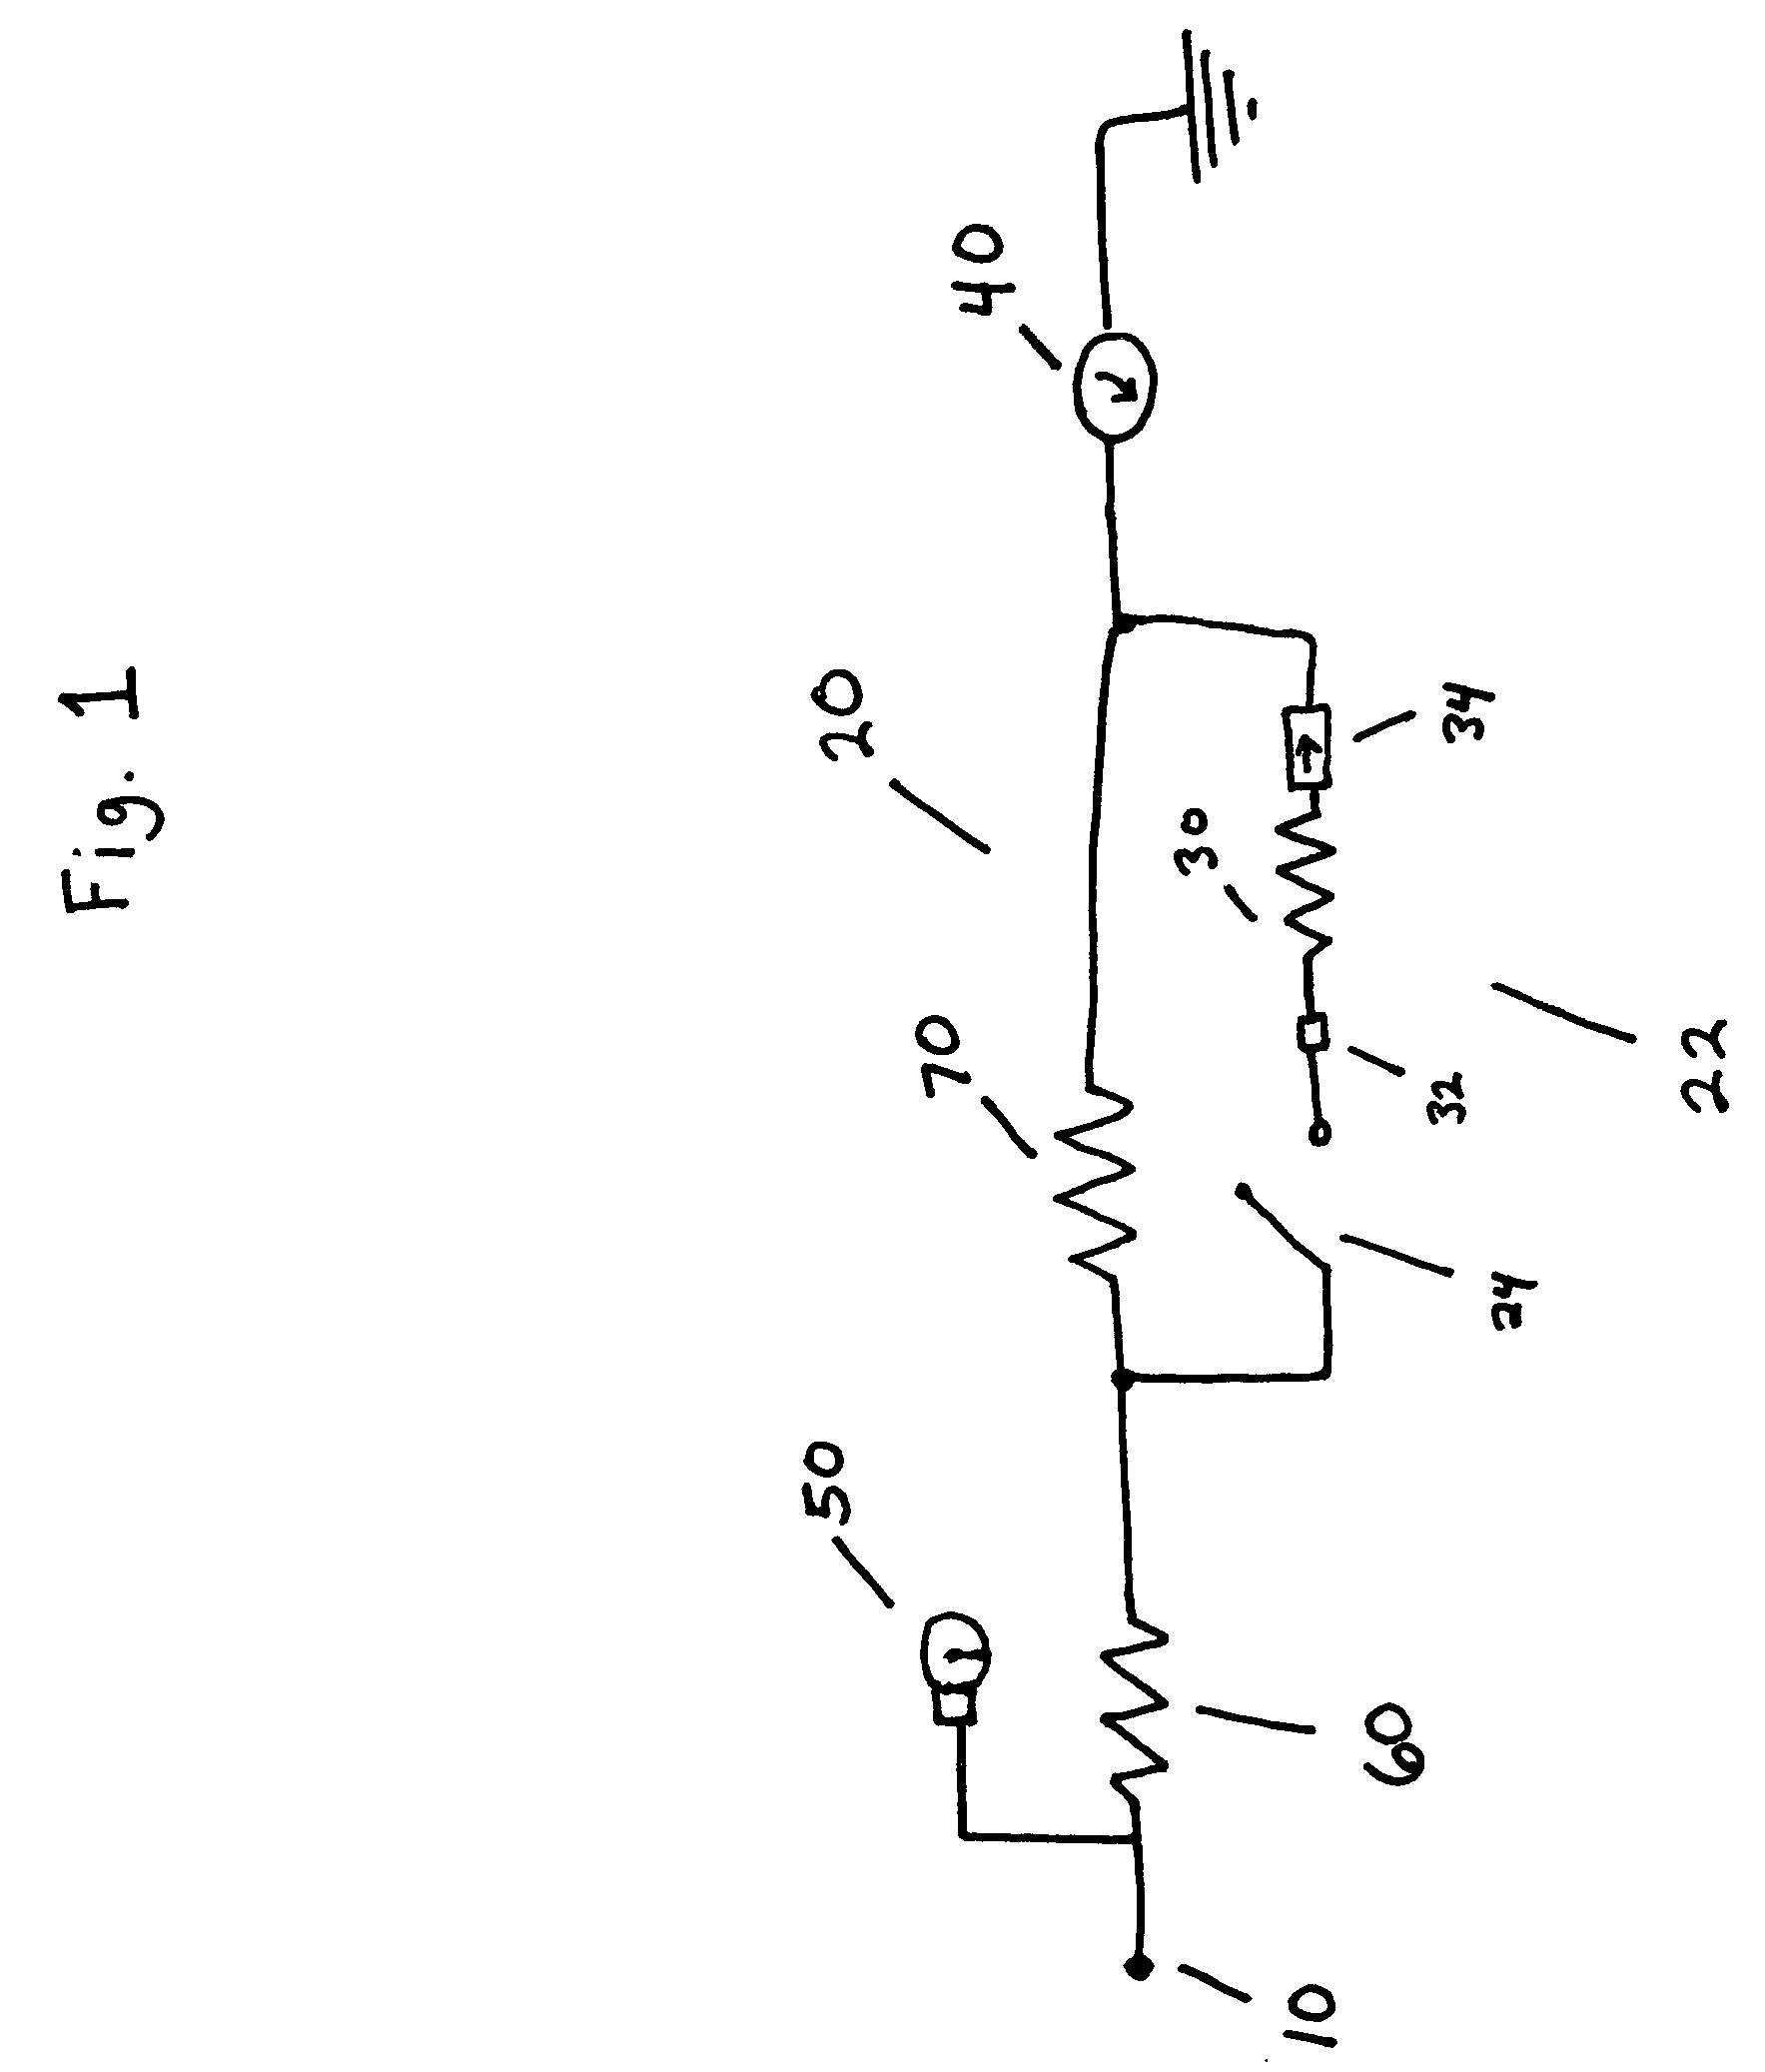 System and method for controlling the flow of exhaled breath during analysis